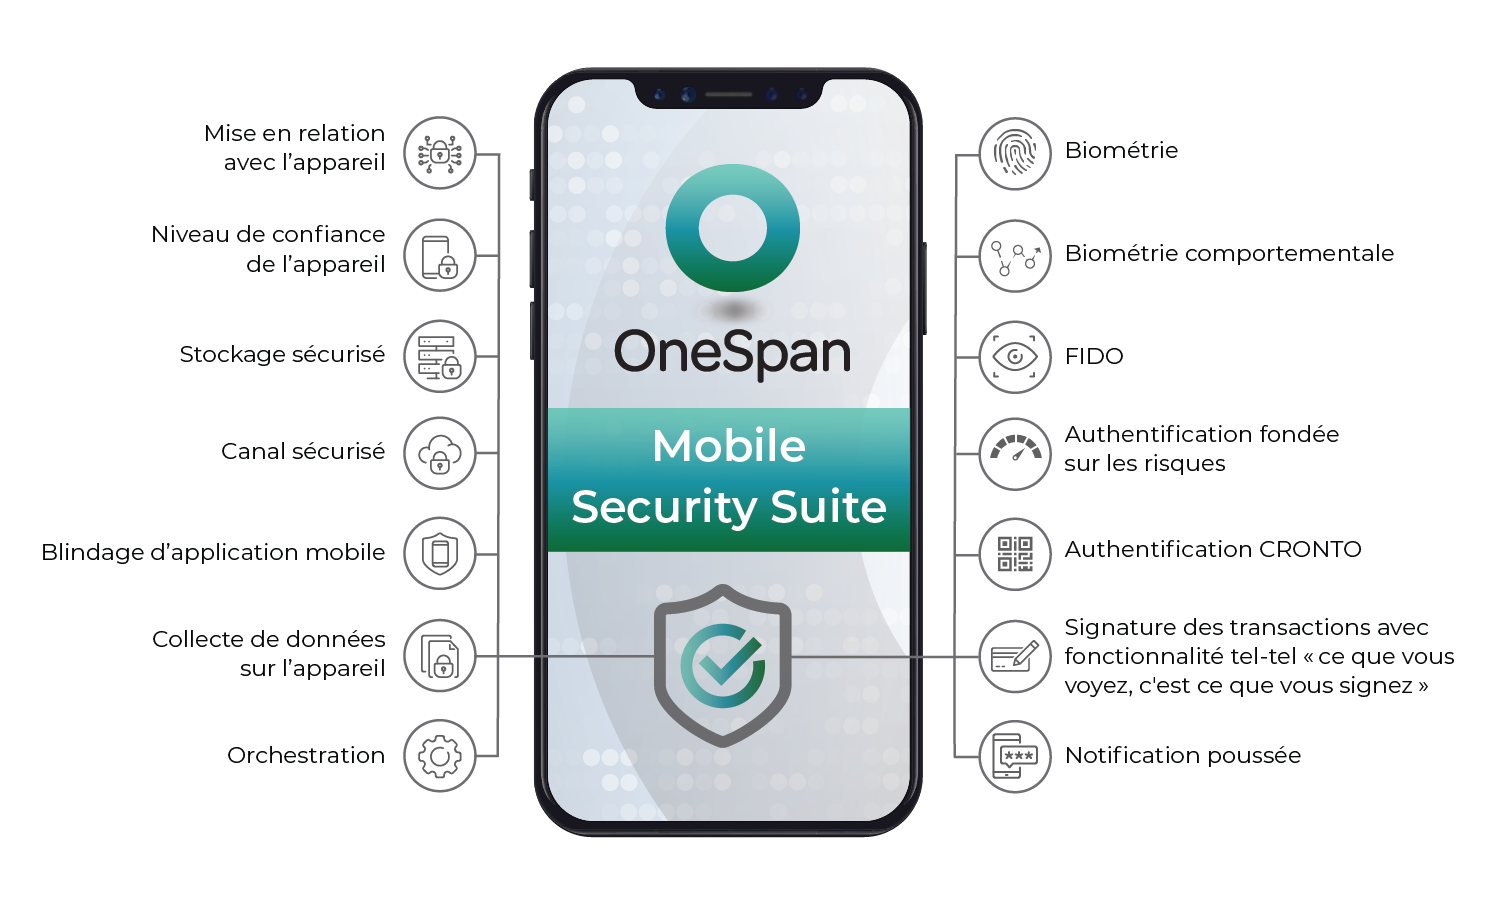 Mobile Security Suite